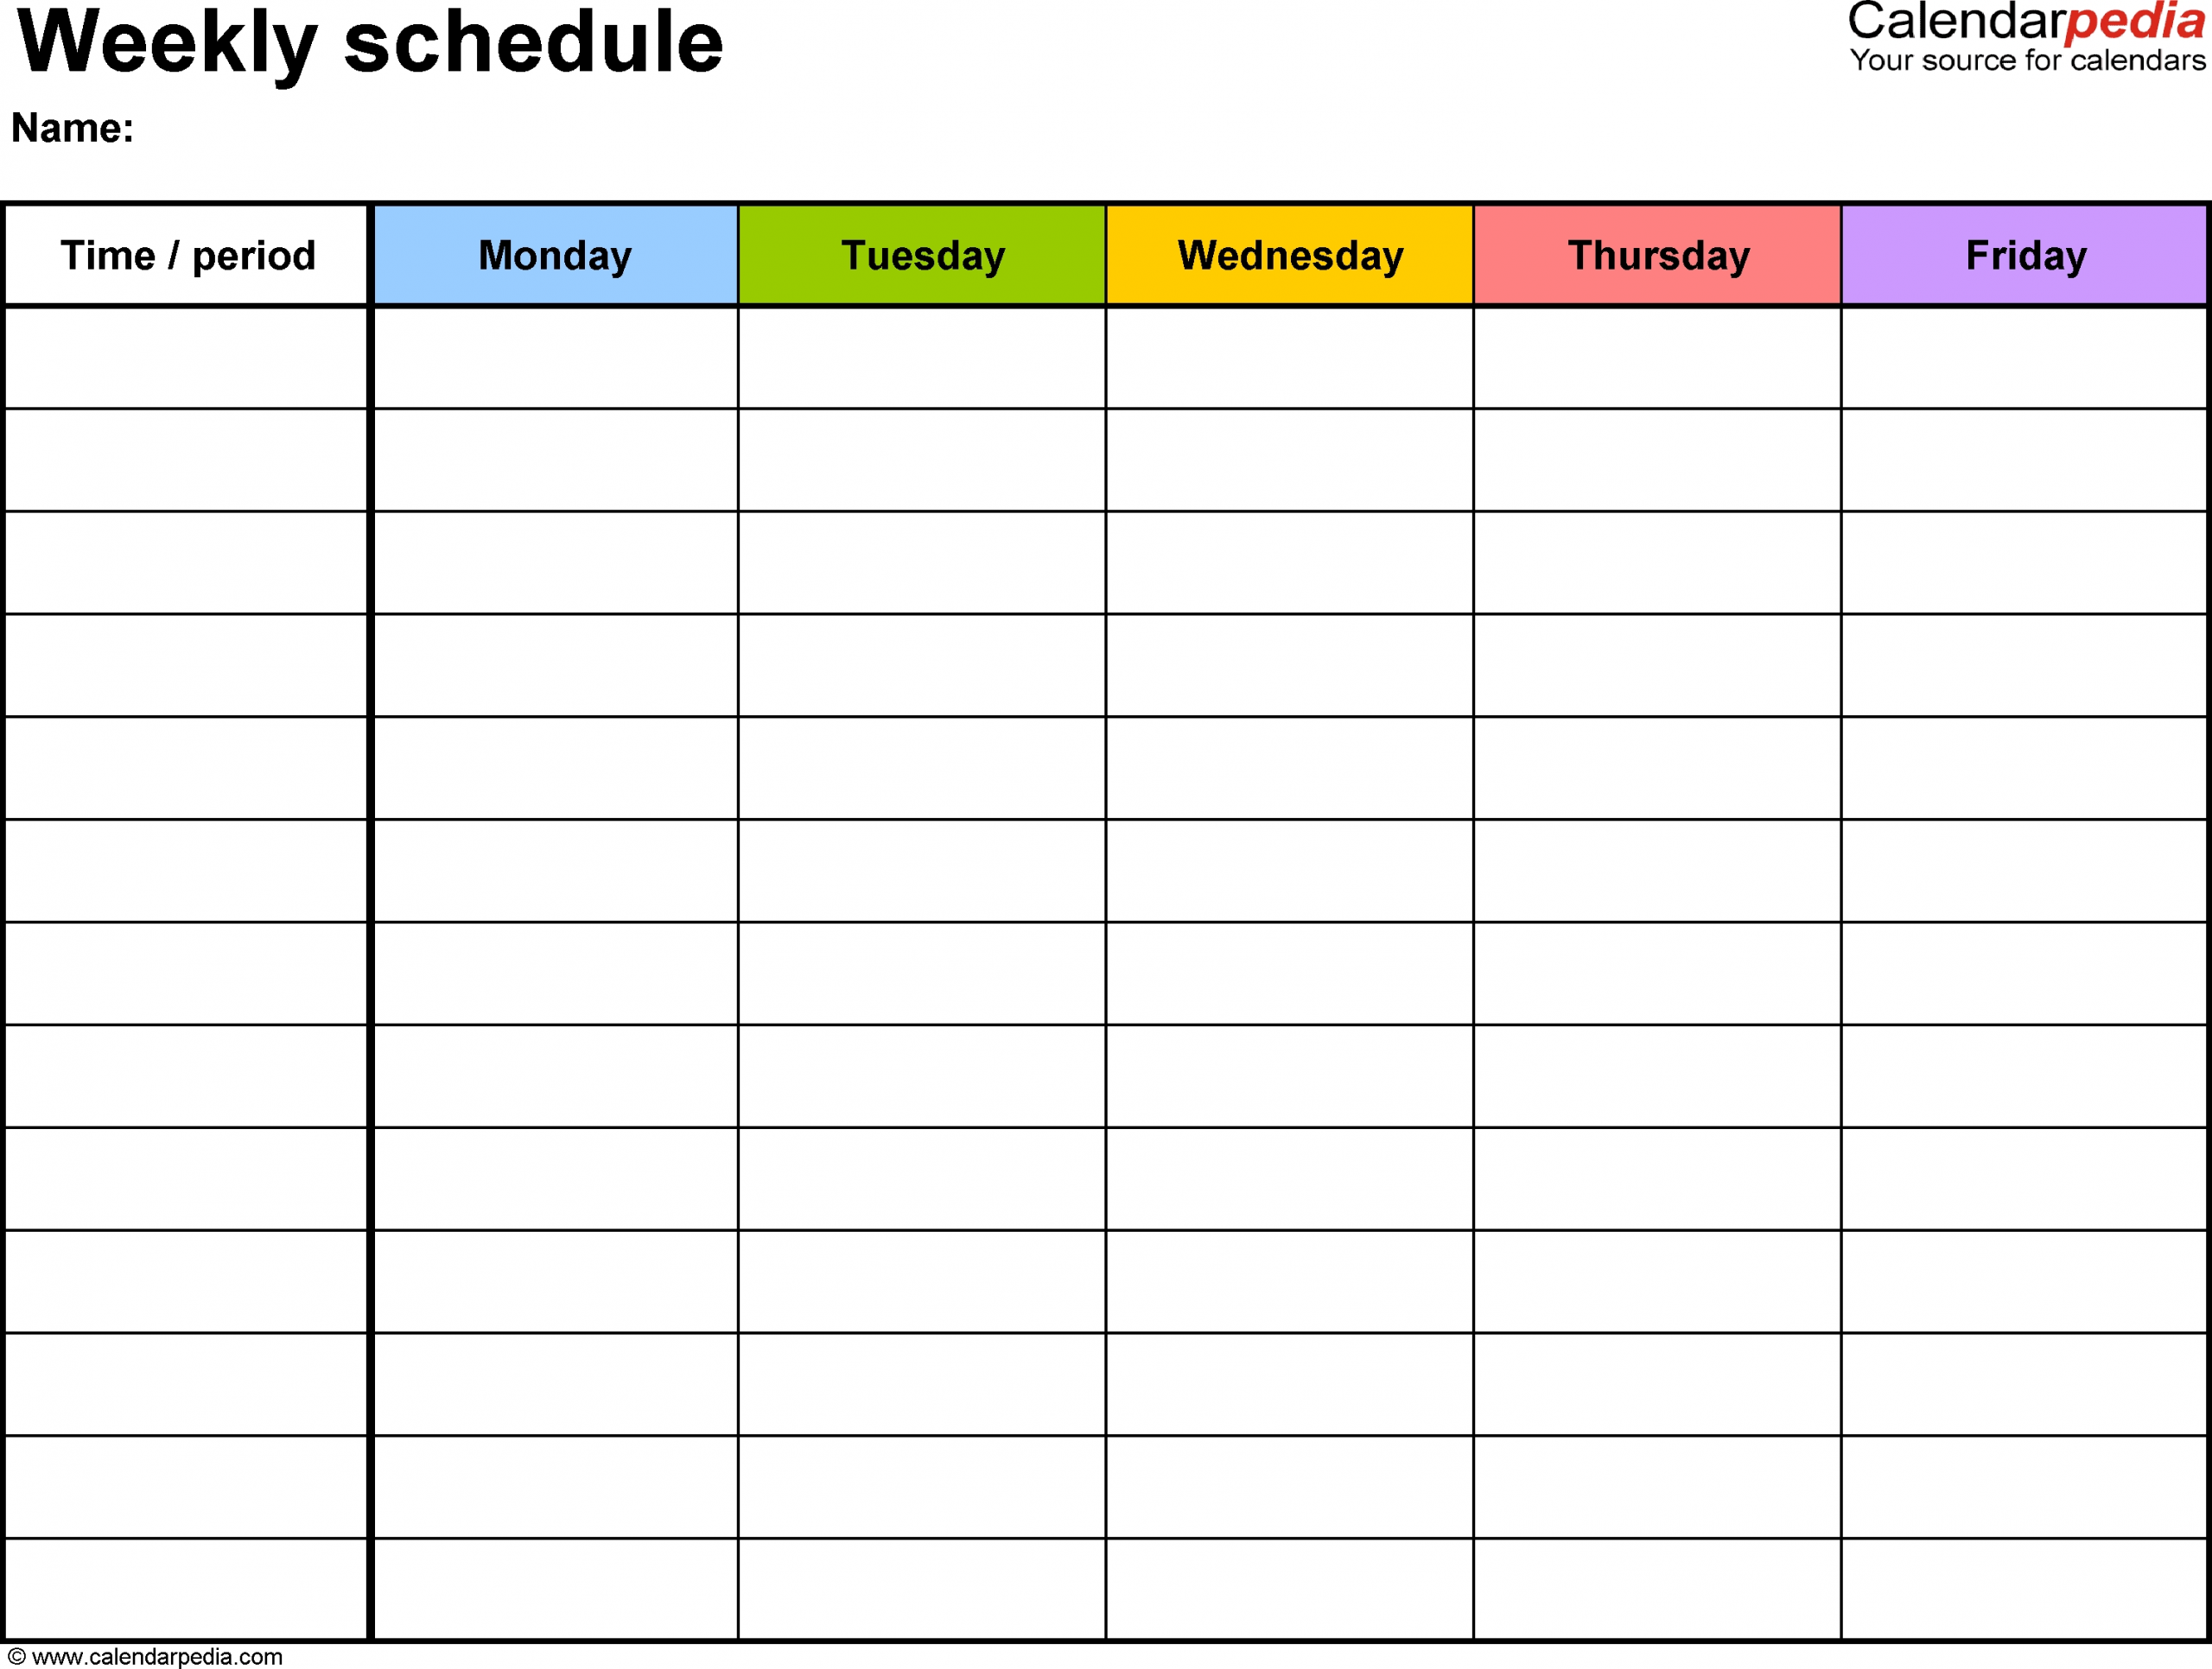 Free Weekly Schedule Templates For Word - 18 Templates throughout Monday To Friday Planner Template